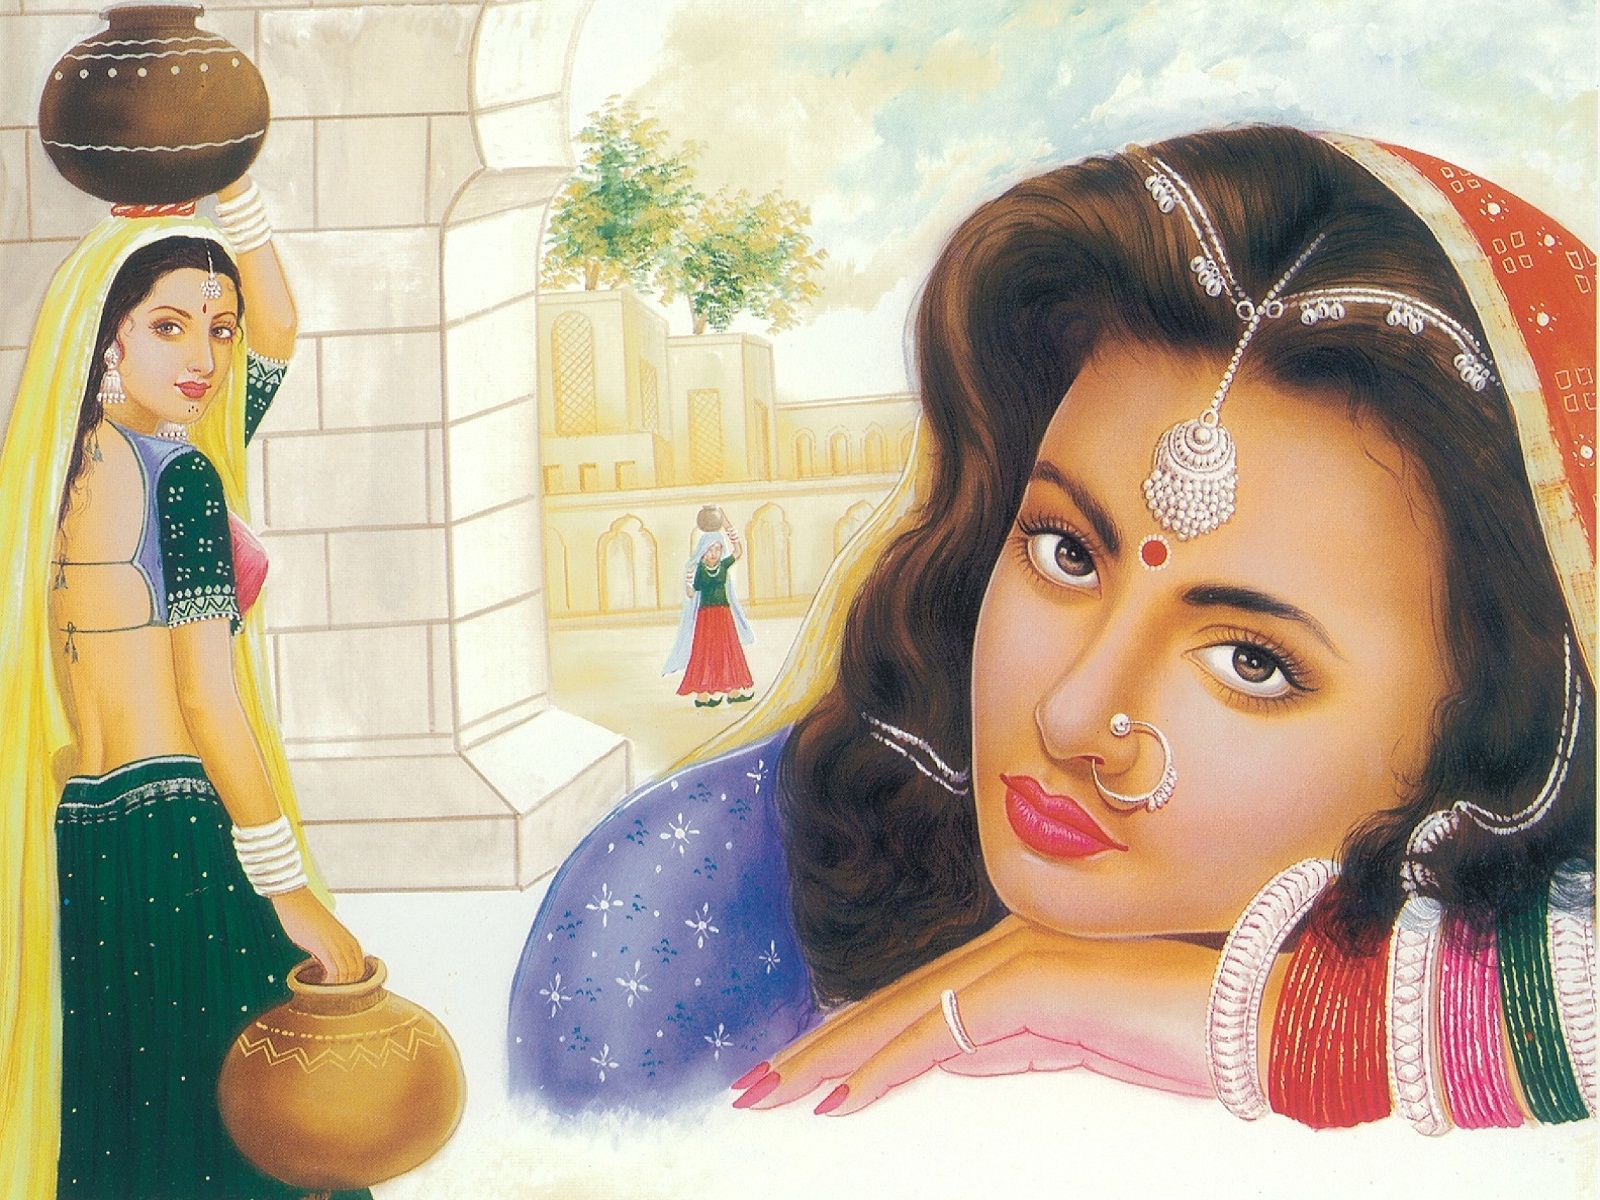 Village Girl Water takes from River Poster. HD Wallpaper Rocks. Woman painting, Beautiful posters, Village girl